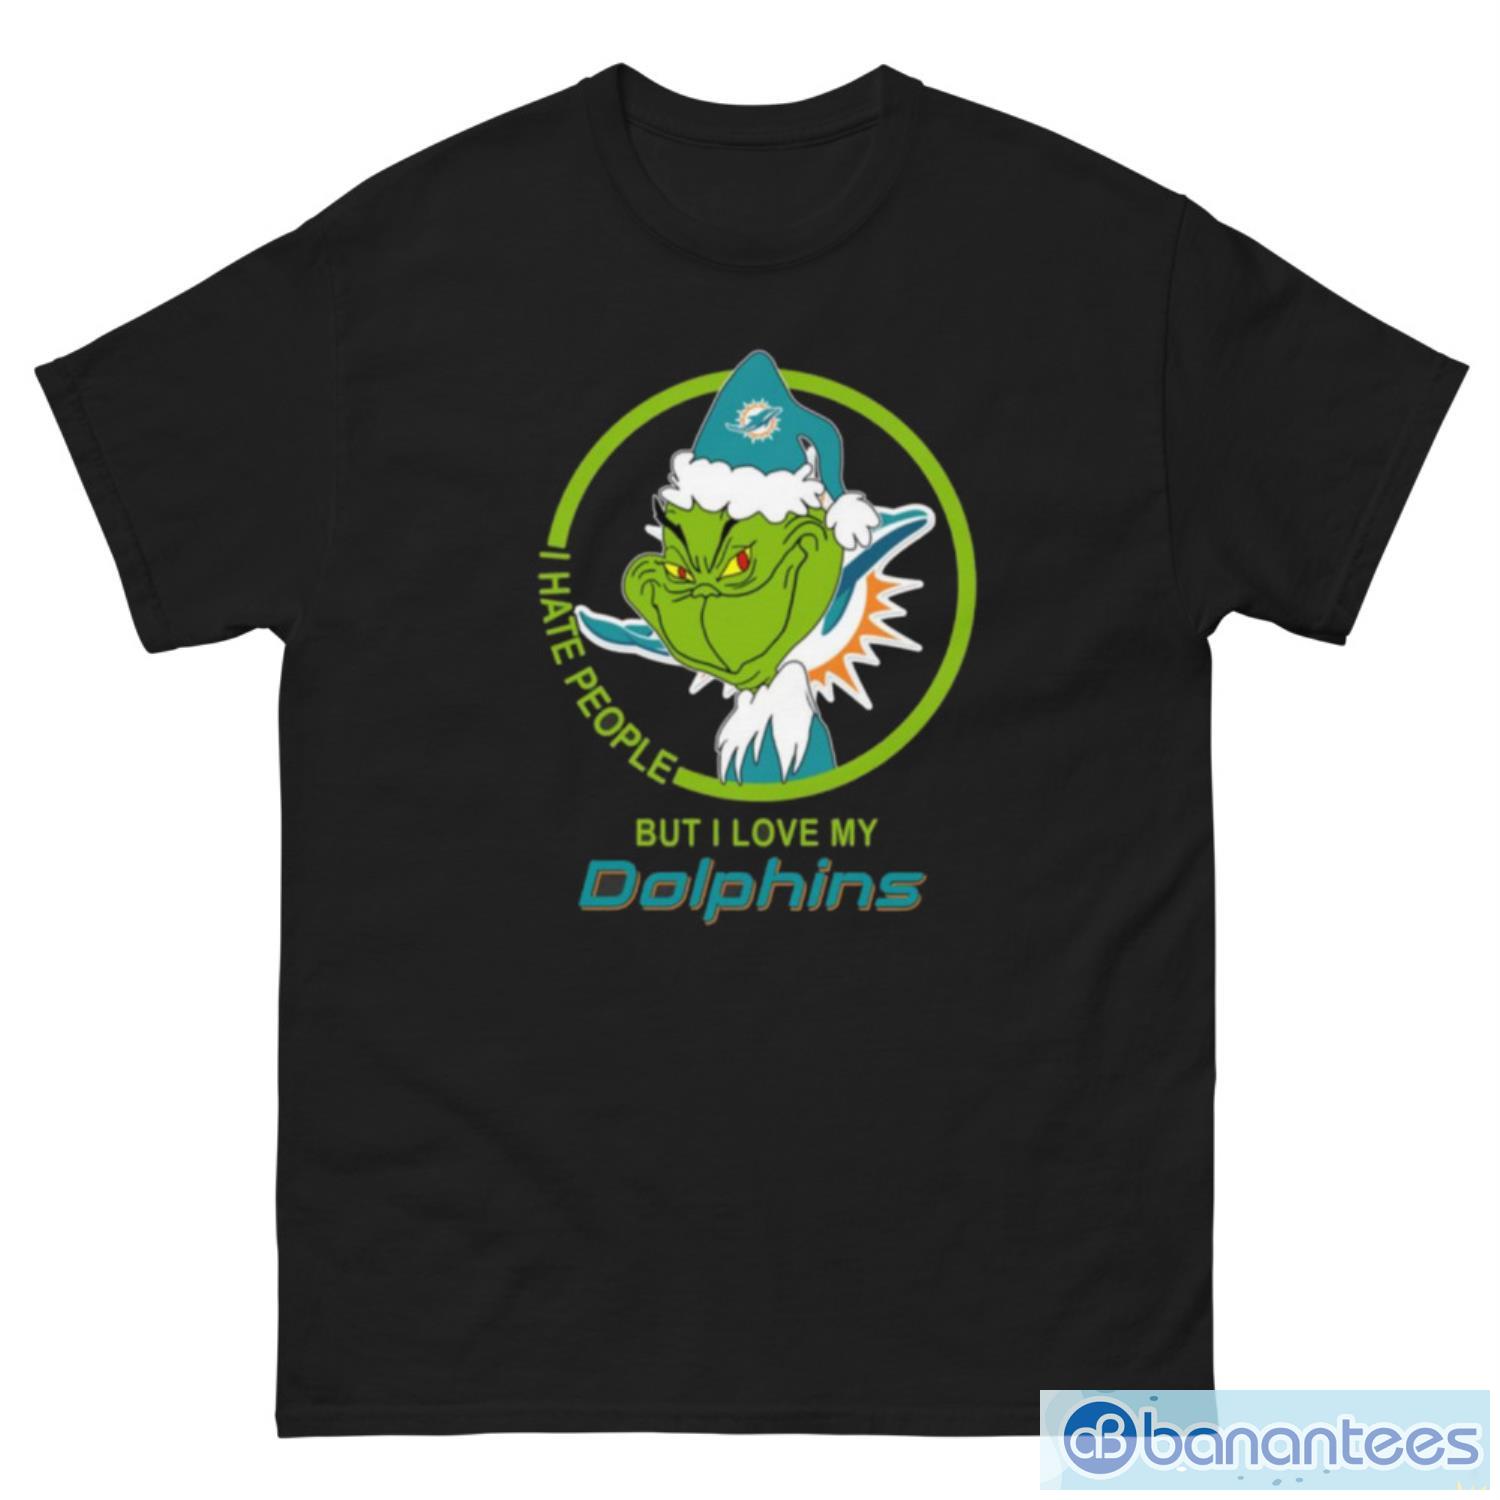 Miami Dolphins NFL Christmas Grinch I Hate People But I Love My Favorite Football Team T Shirt - G500 Men’s Classic Tee